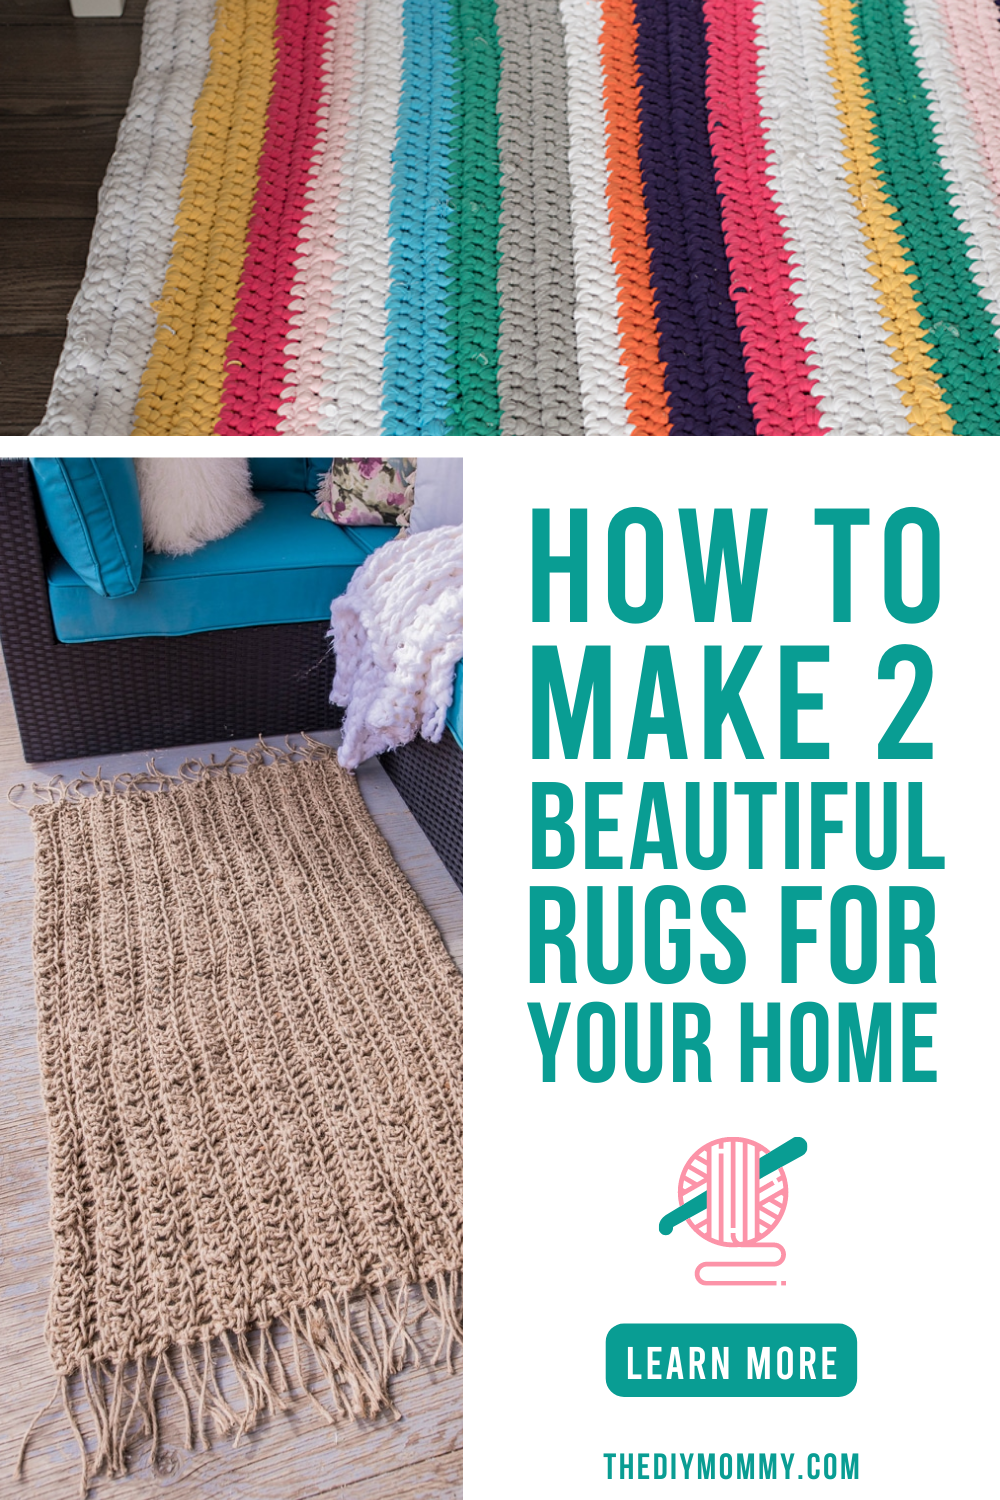 How to Make Two Beautiful Rugs For Your Home on a Budget